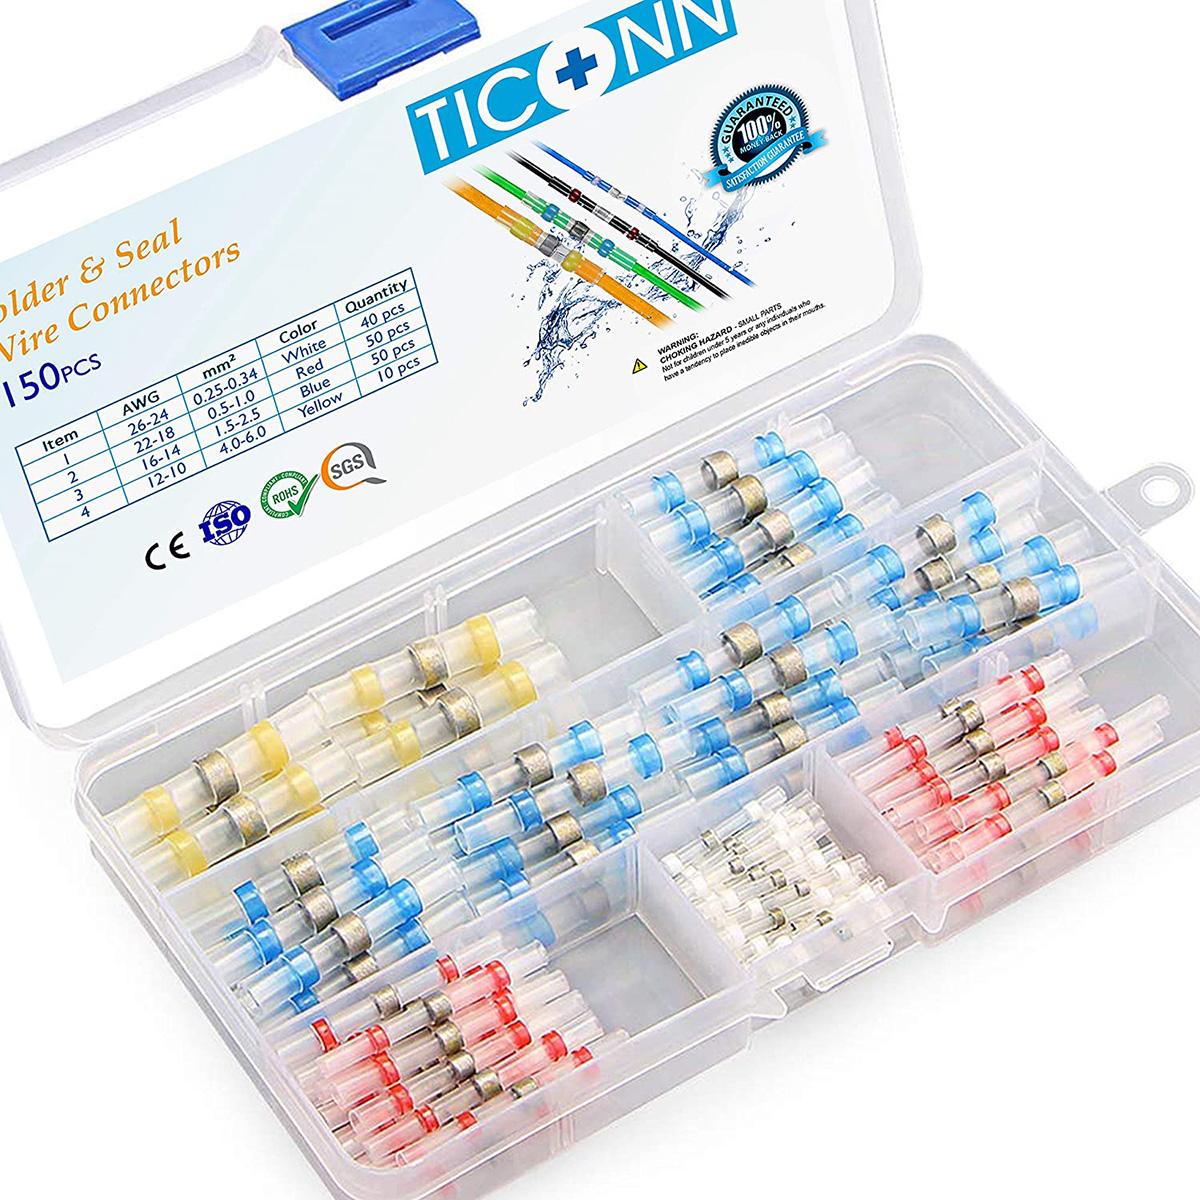 150-Piece Ticonn Solder Seal Wire Connectors for $6.37 Shipped